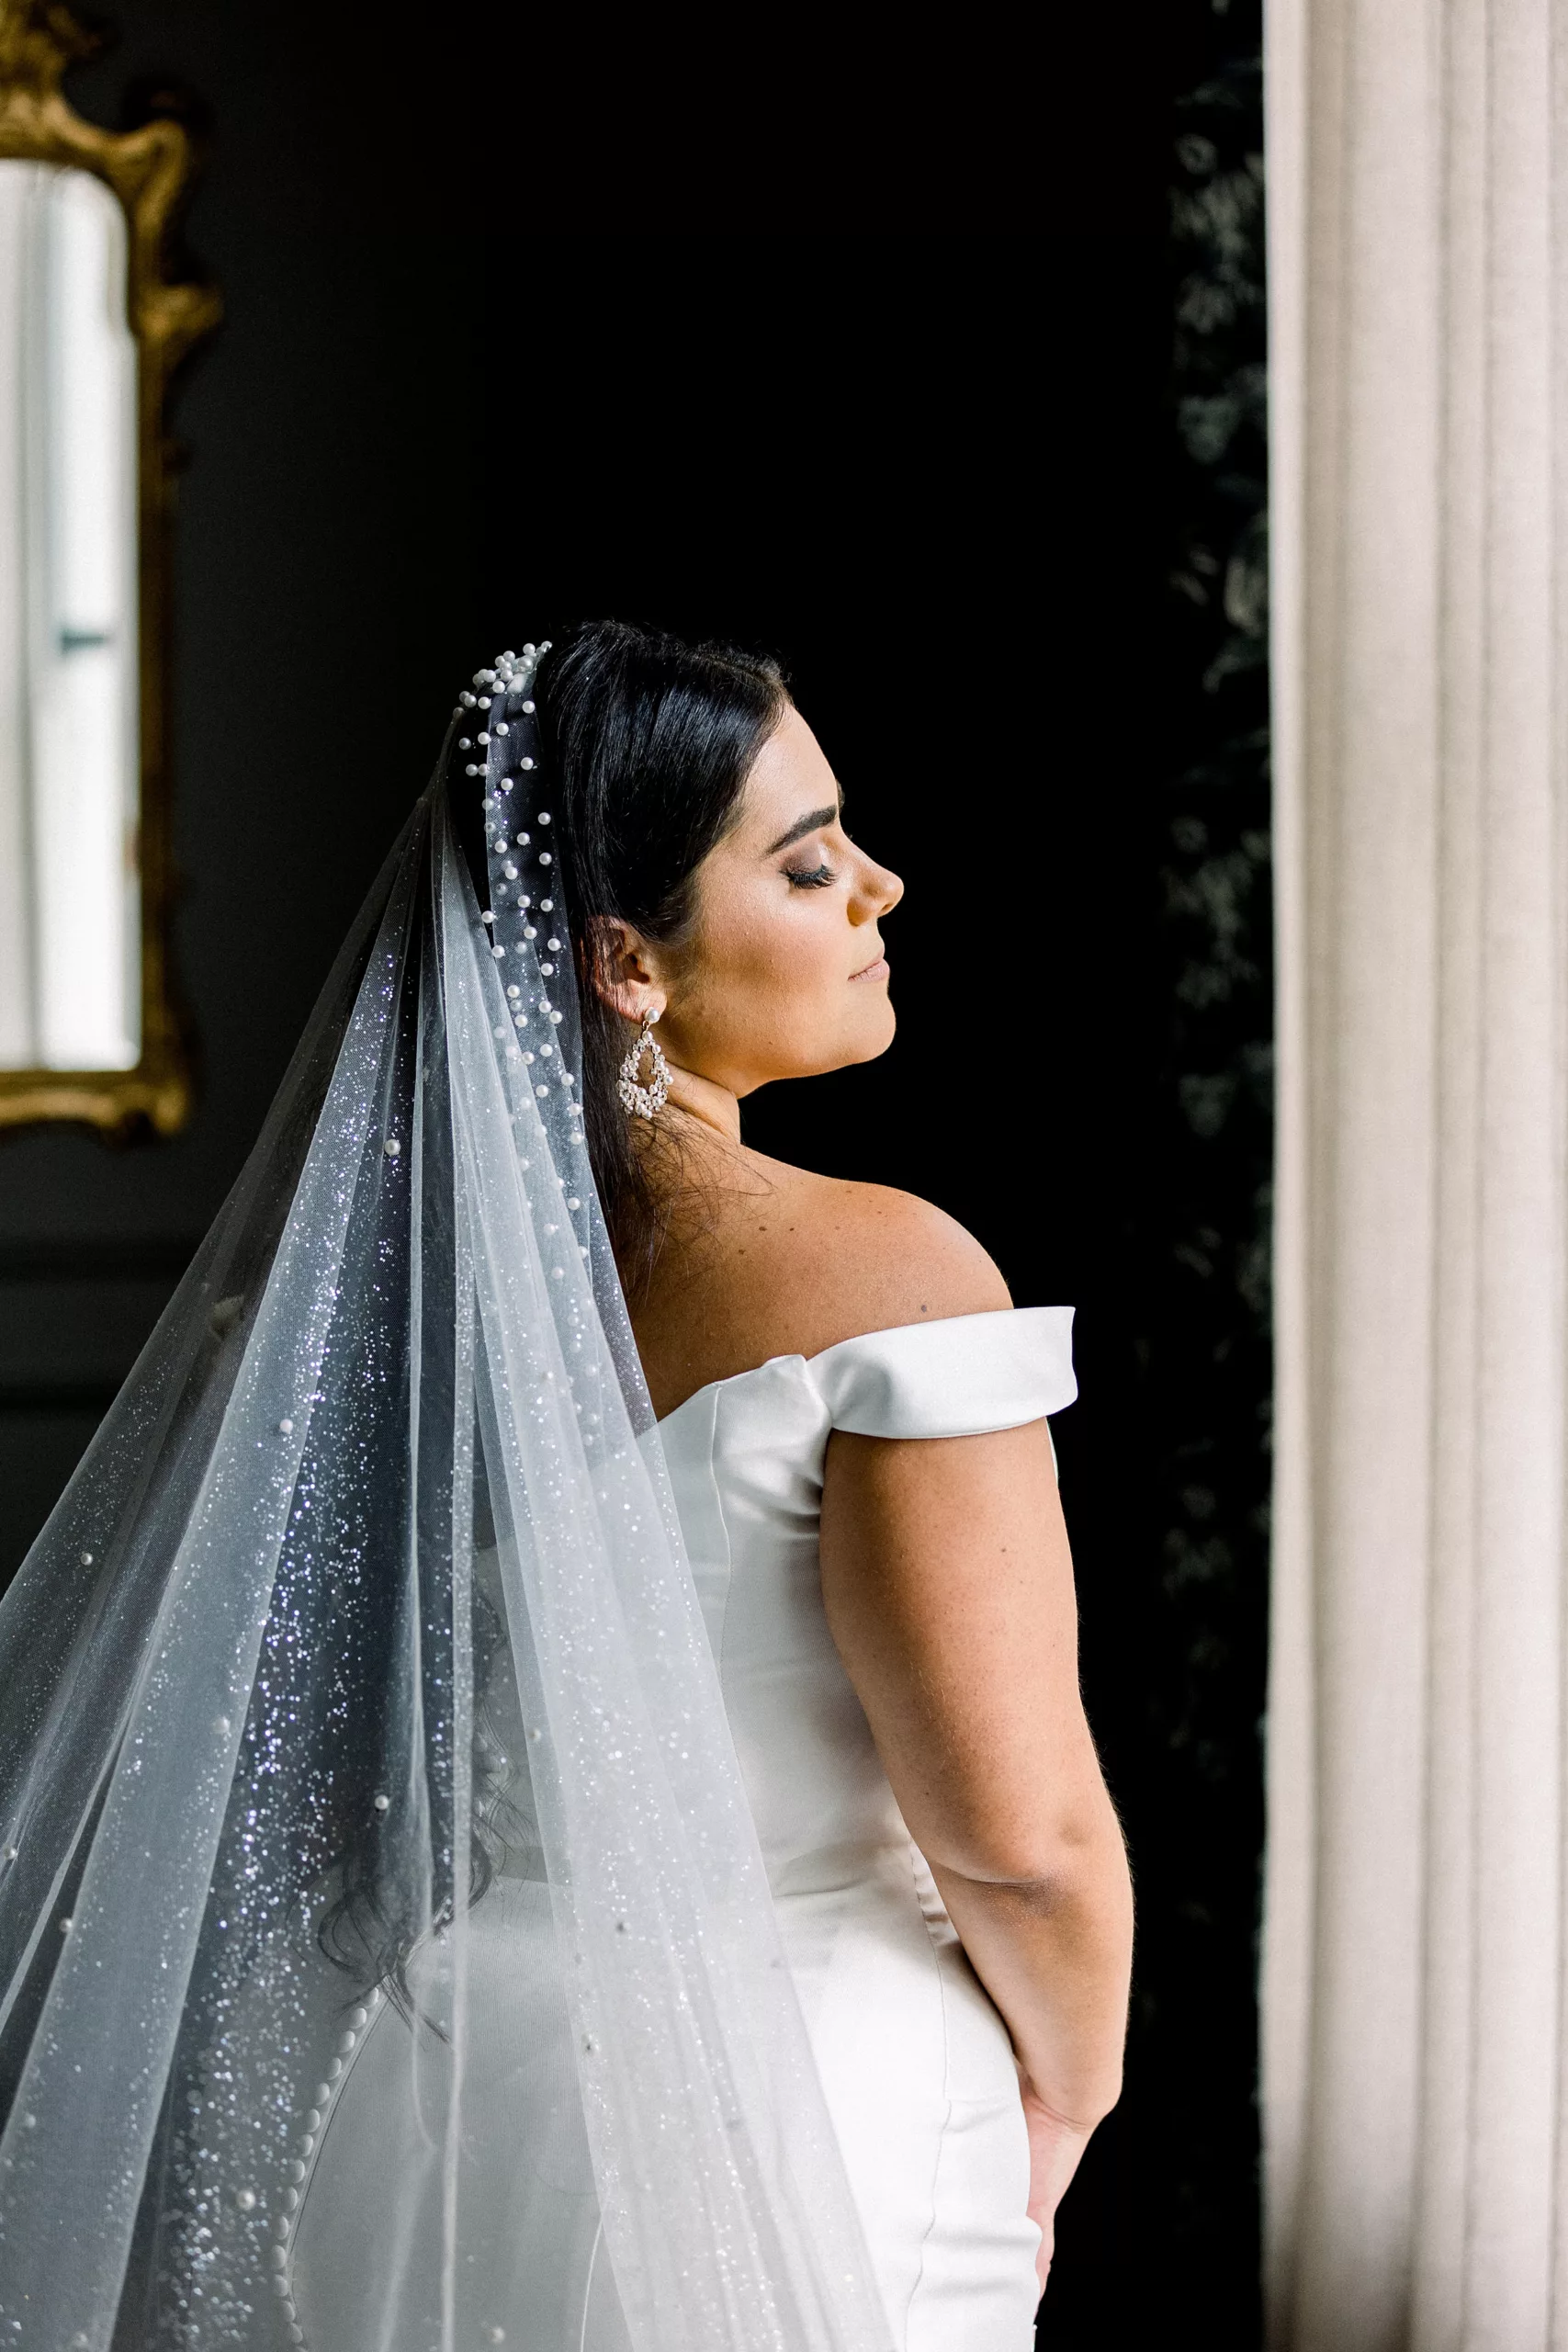 A bride stands in a window in her white dress and long veil